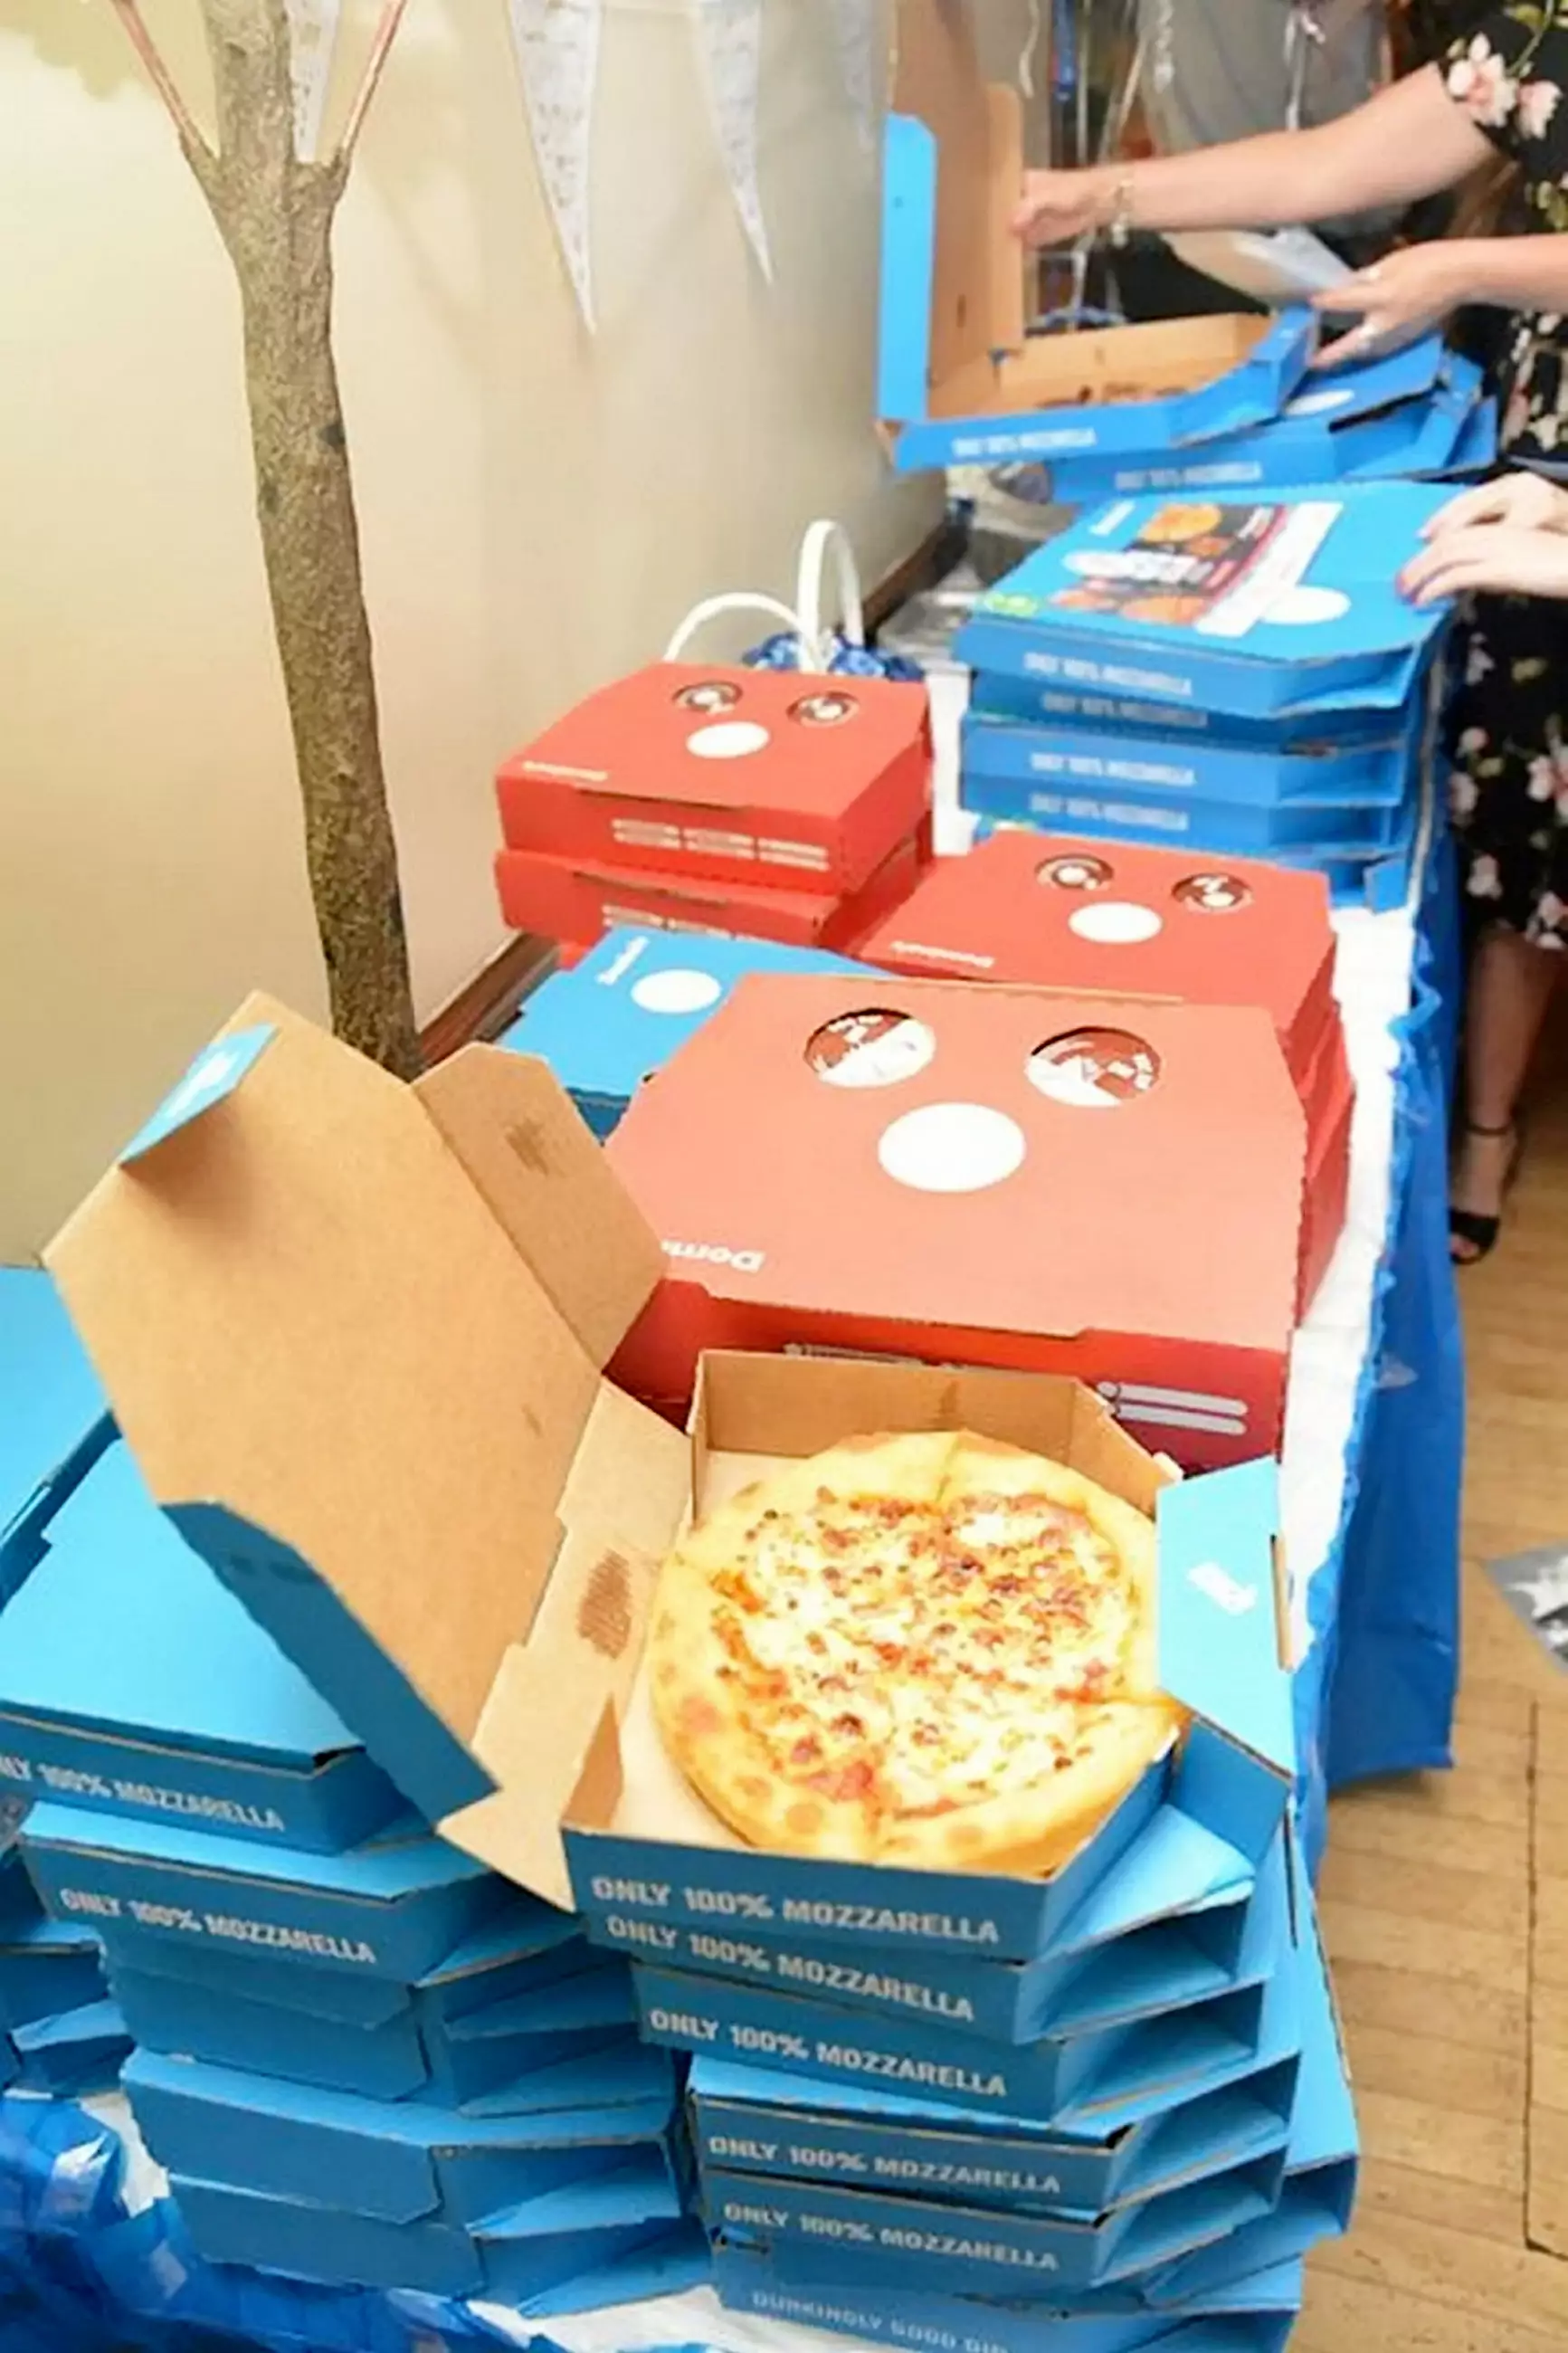 The Domino's pizza order was absolutely huge (